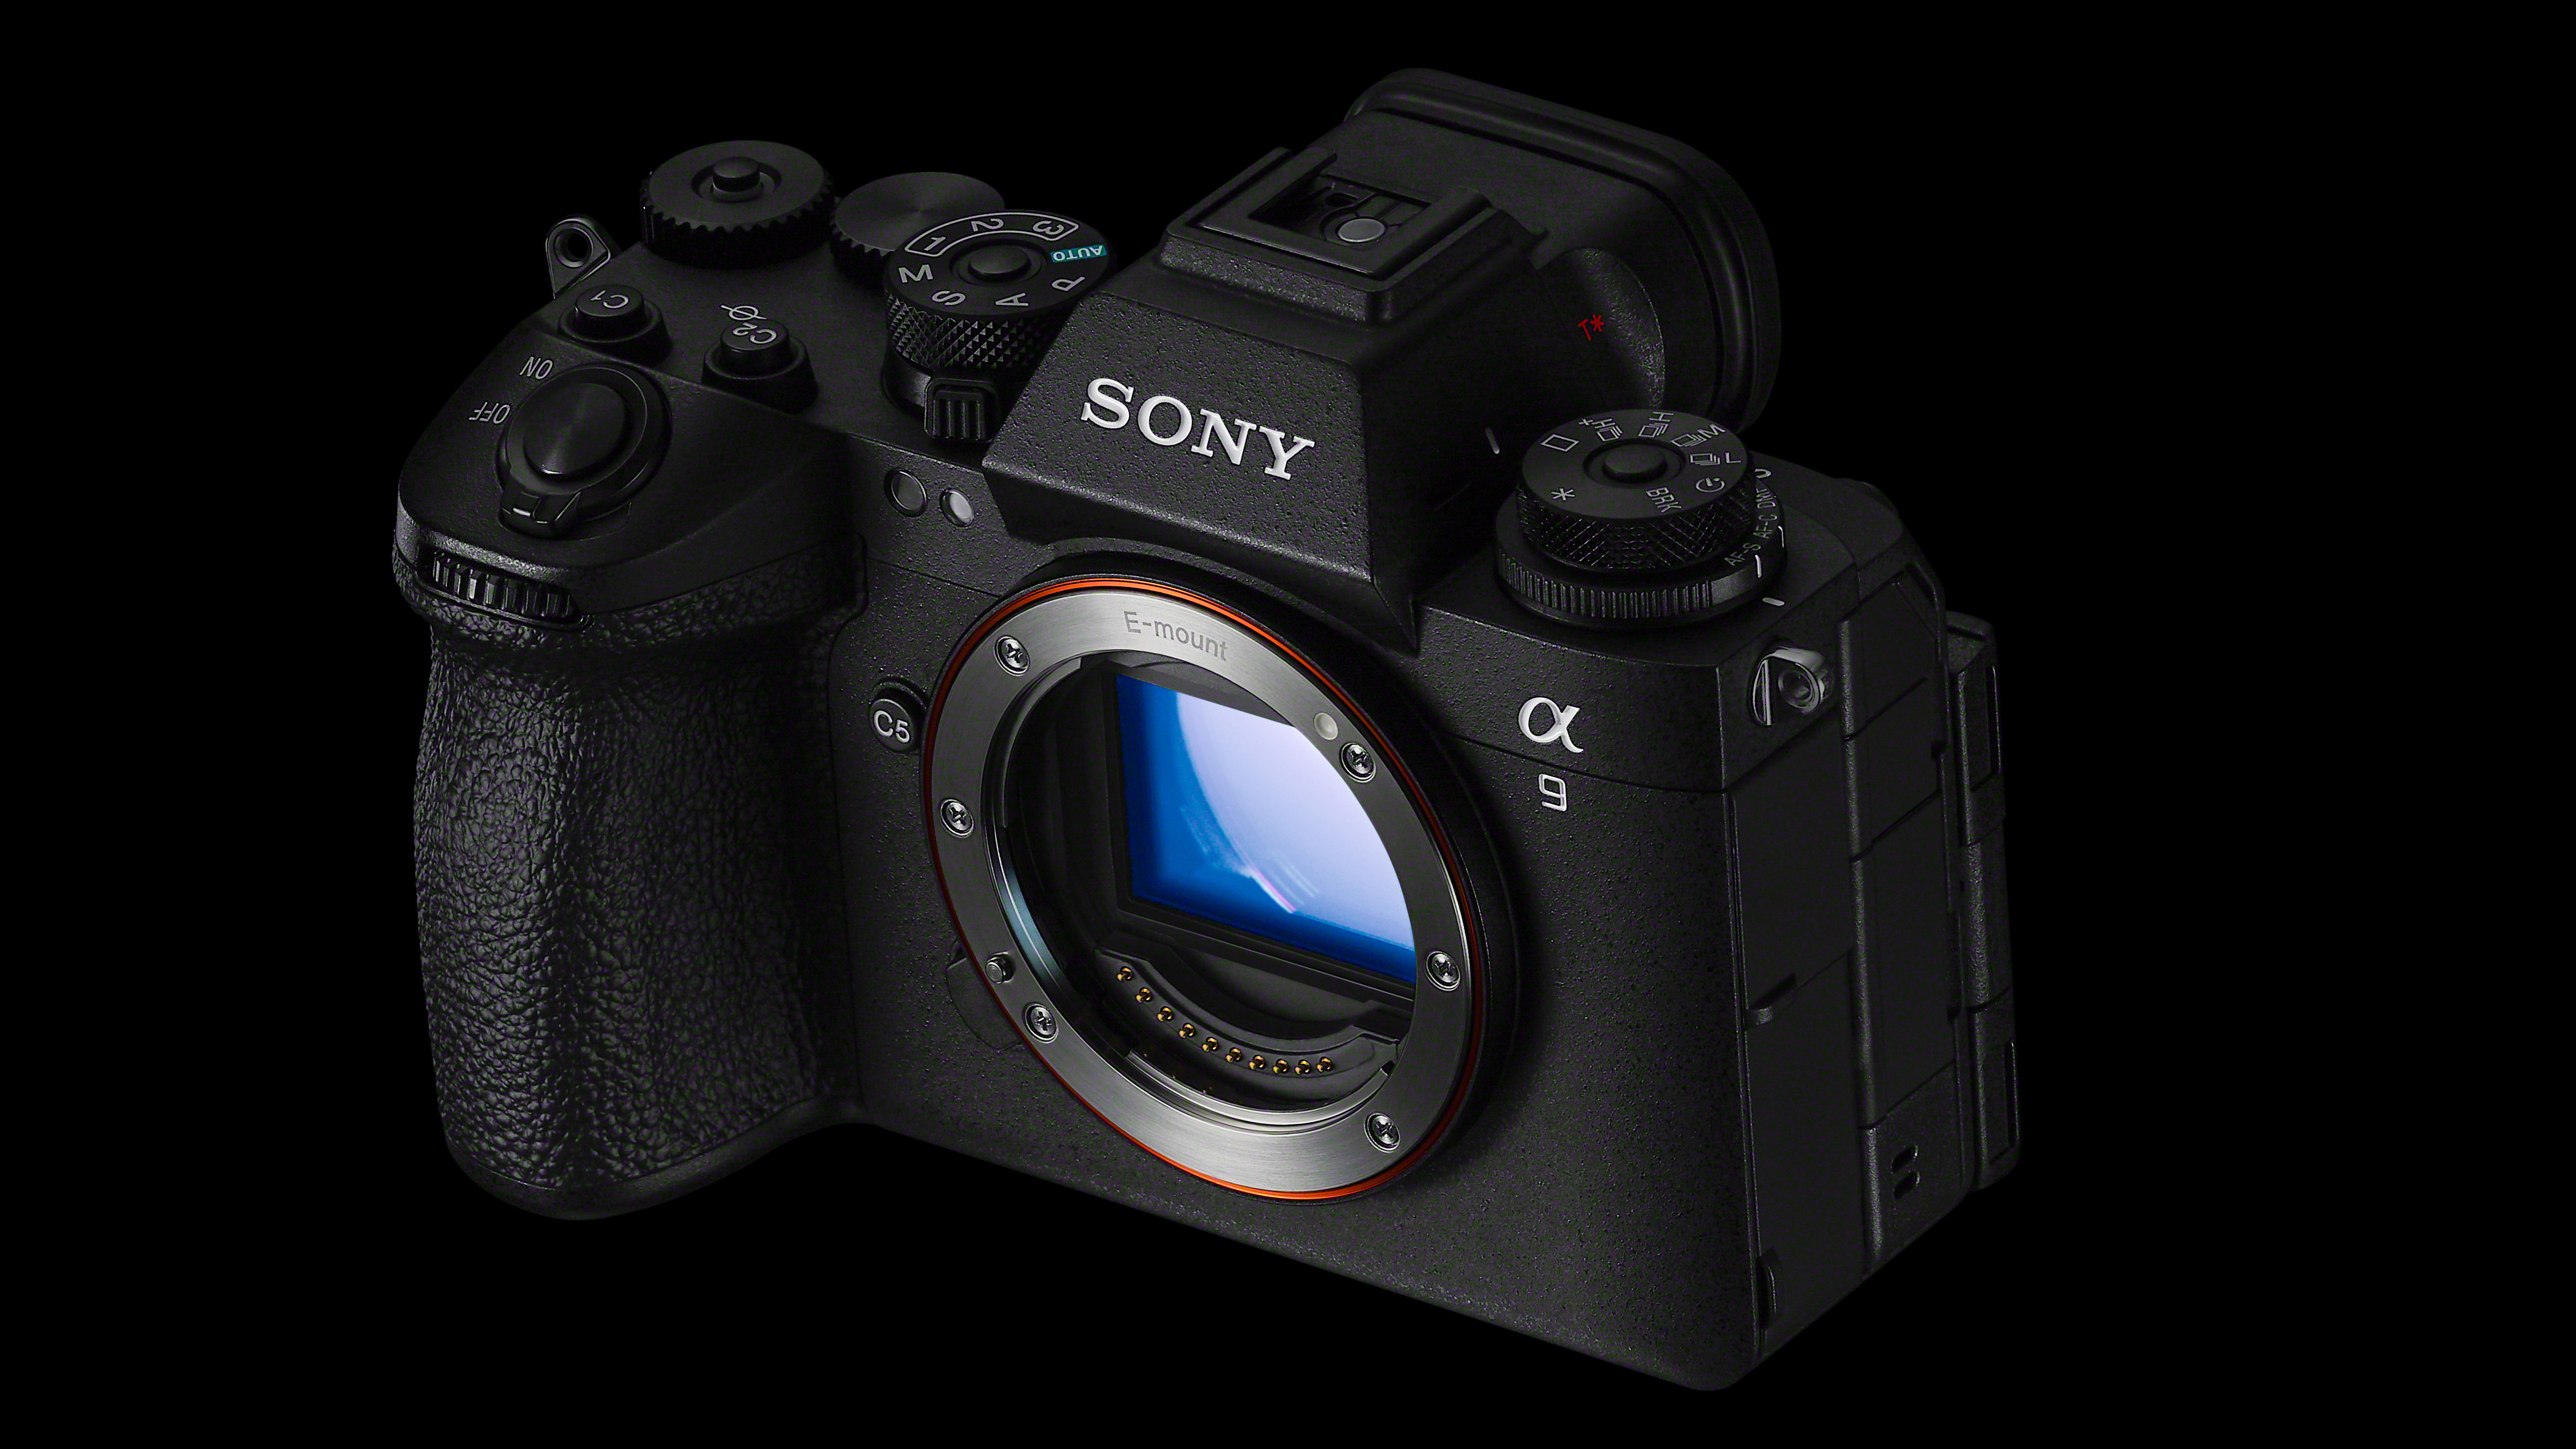 The Sony A9 III gets even more features via a significant firmware update!